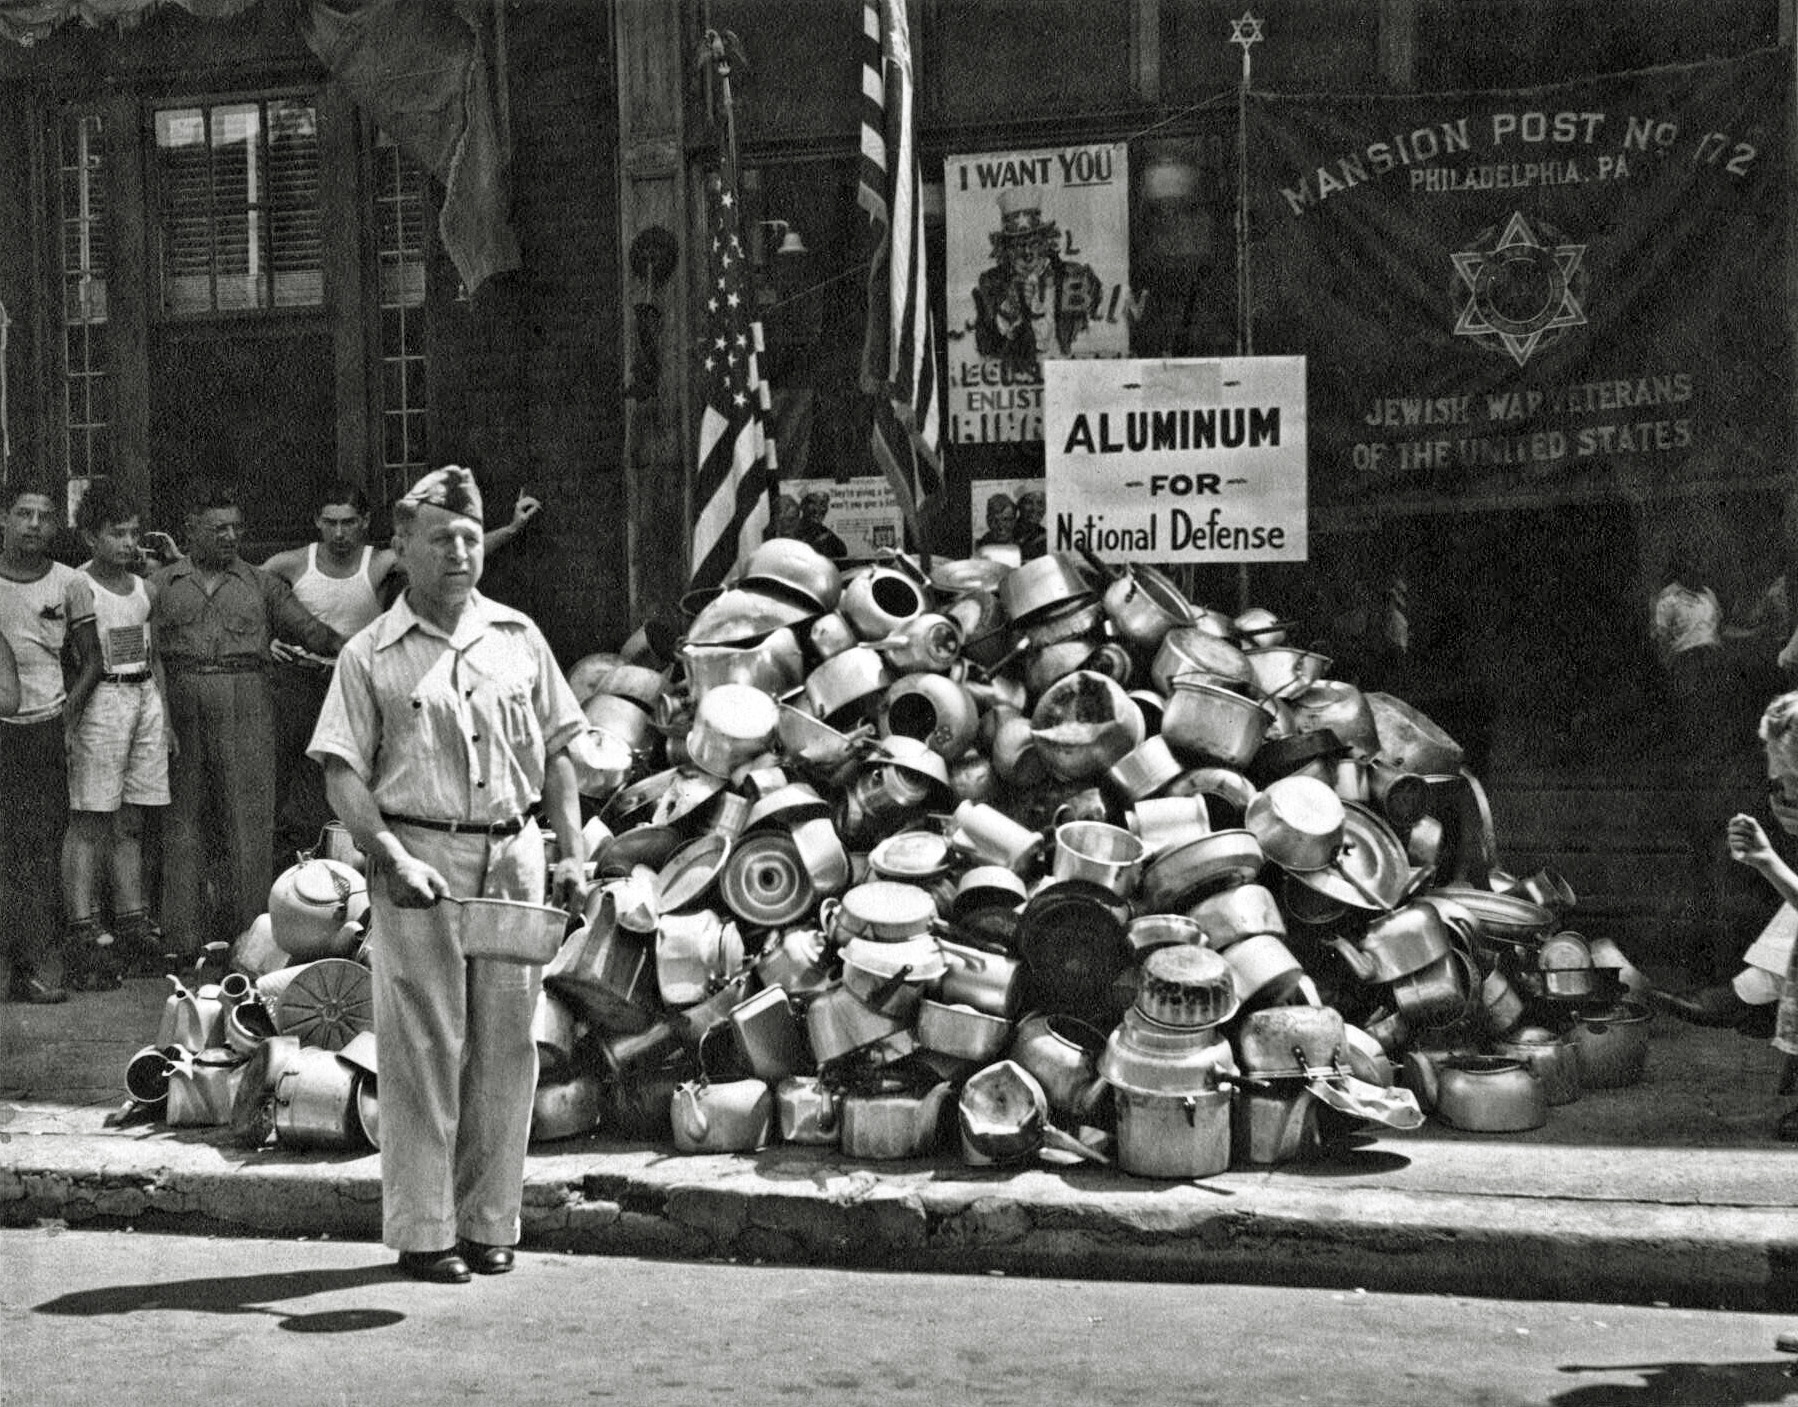 My maternal grandfather, World War I veteran Leo C. Ziv, collecting aluminum for defense in Philadelphia's Strawberry Mansion neighborhood. His lungs had been burned by mustard gas while serving with the American Expeditionary Force. View full size.